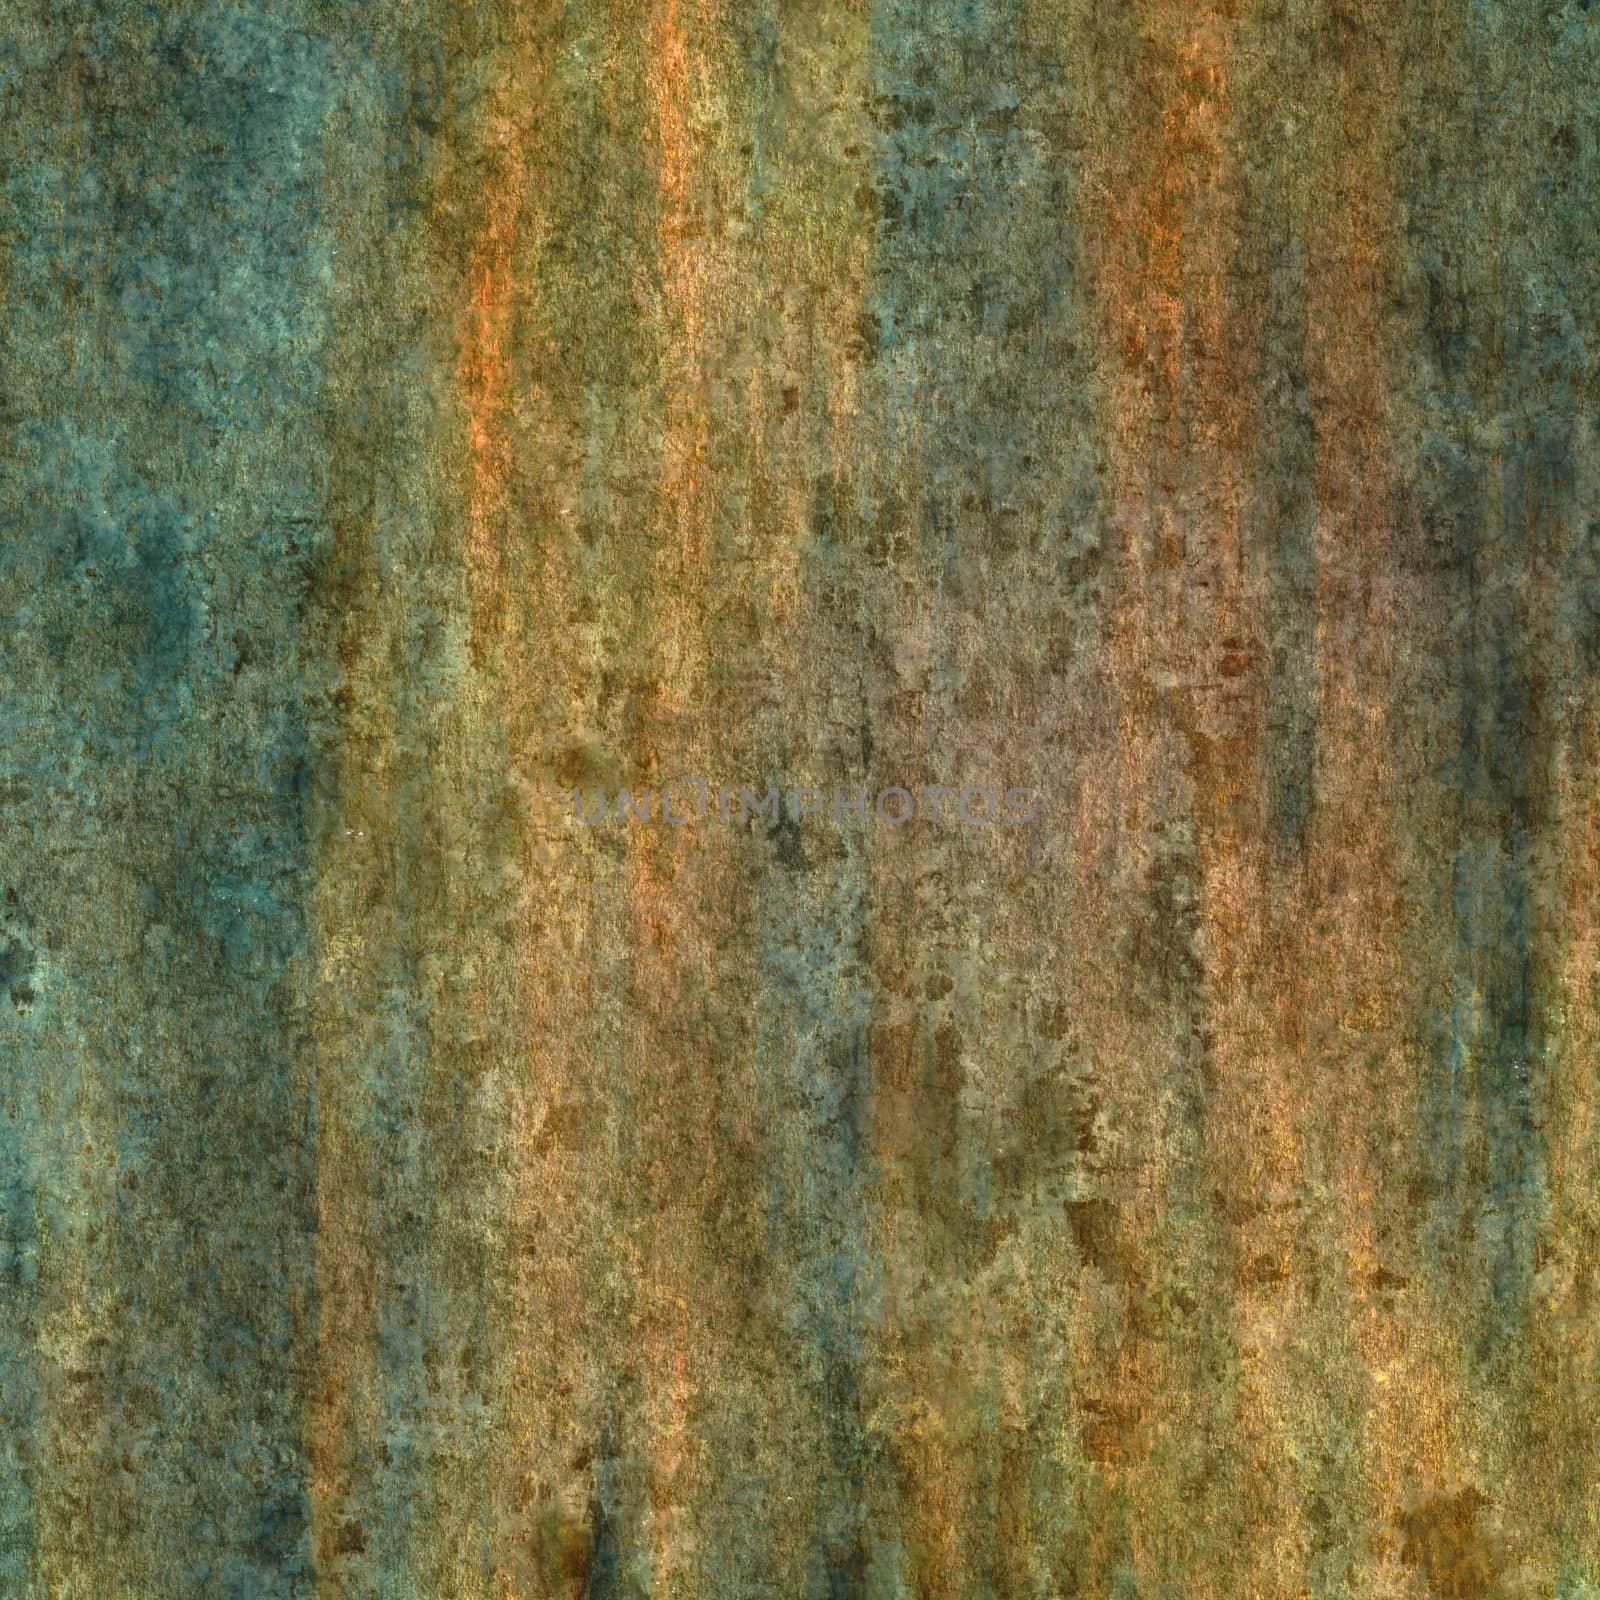 Illustration of a typical rusty surface background